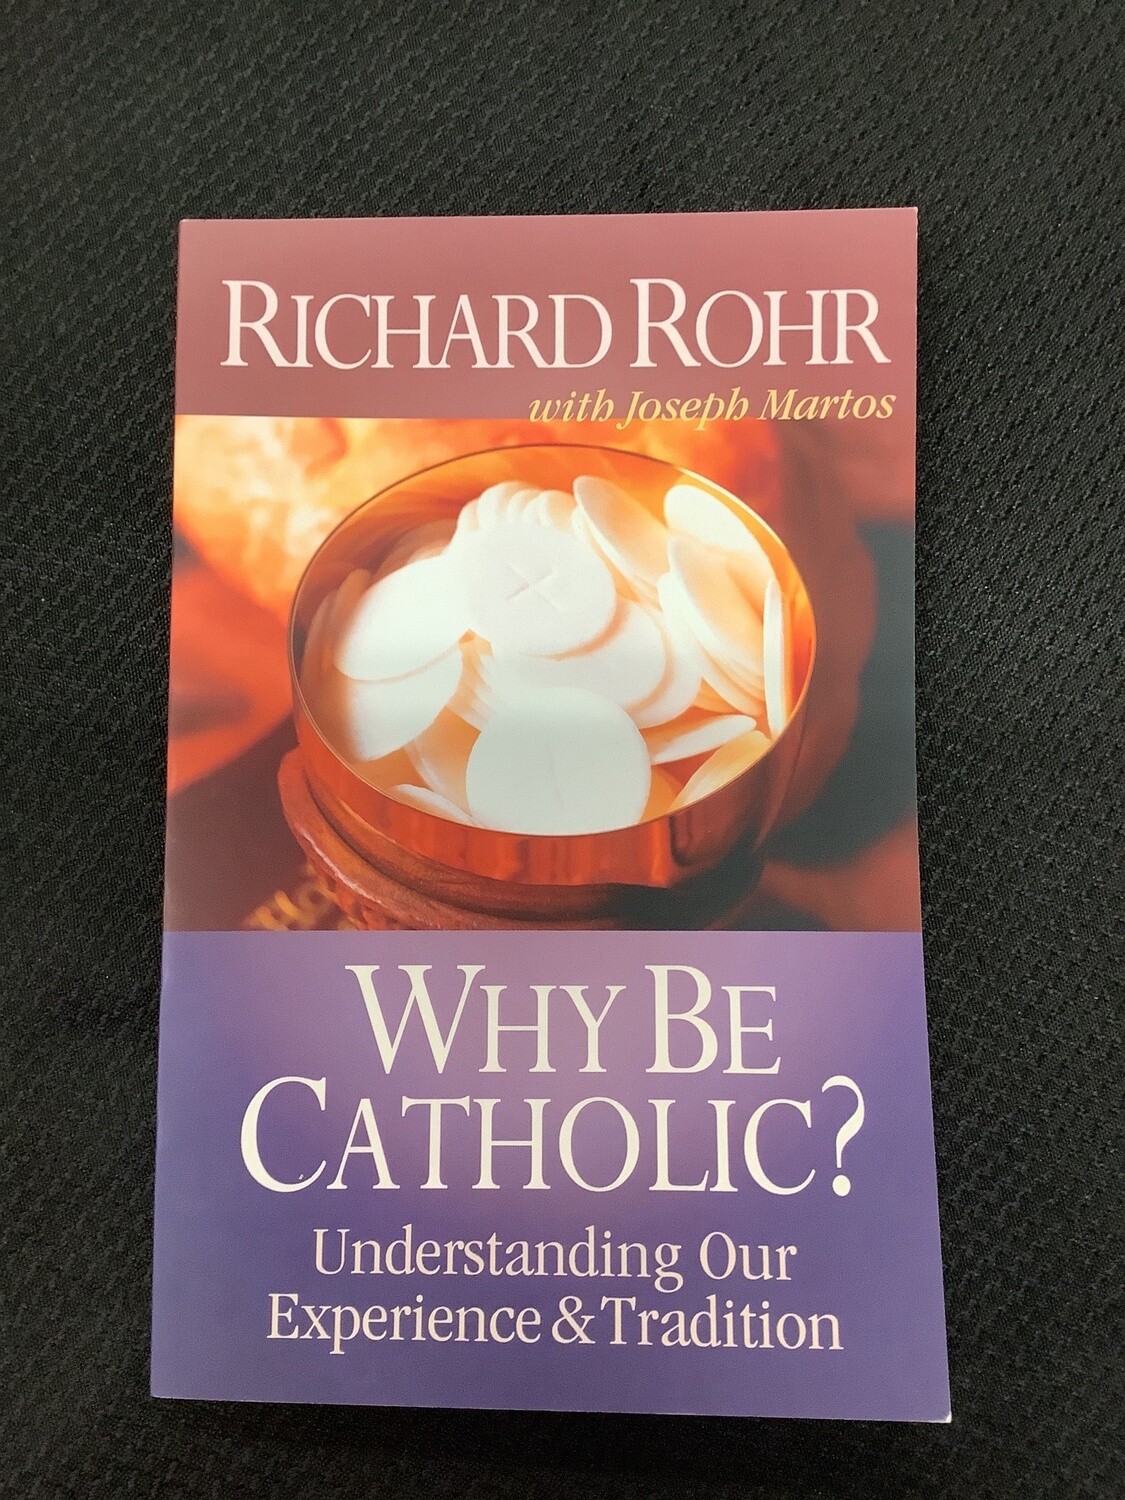 Why Be Catholic? Understanding Our Experience & Tradition - Richard Rohr with Joseph Martos